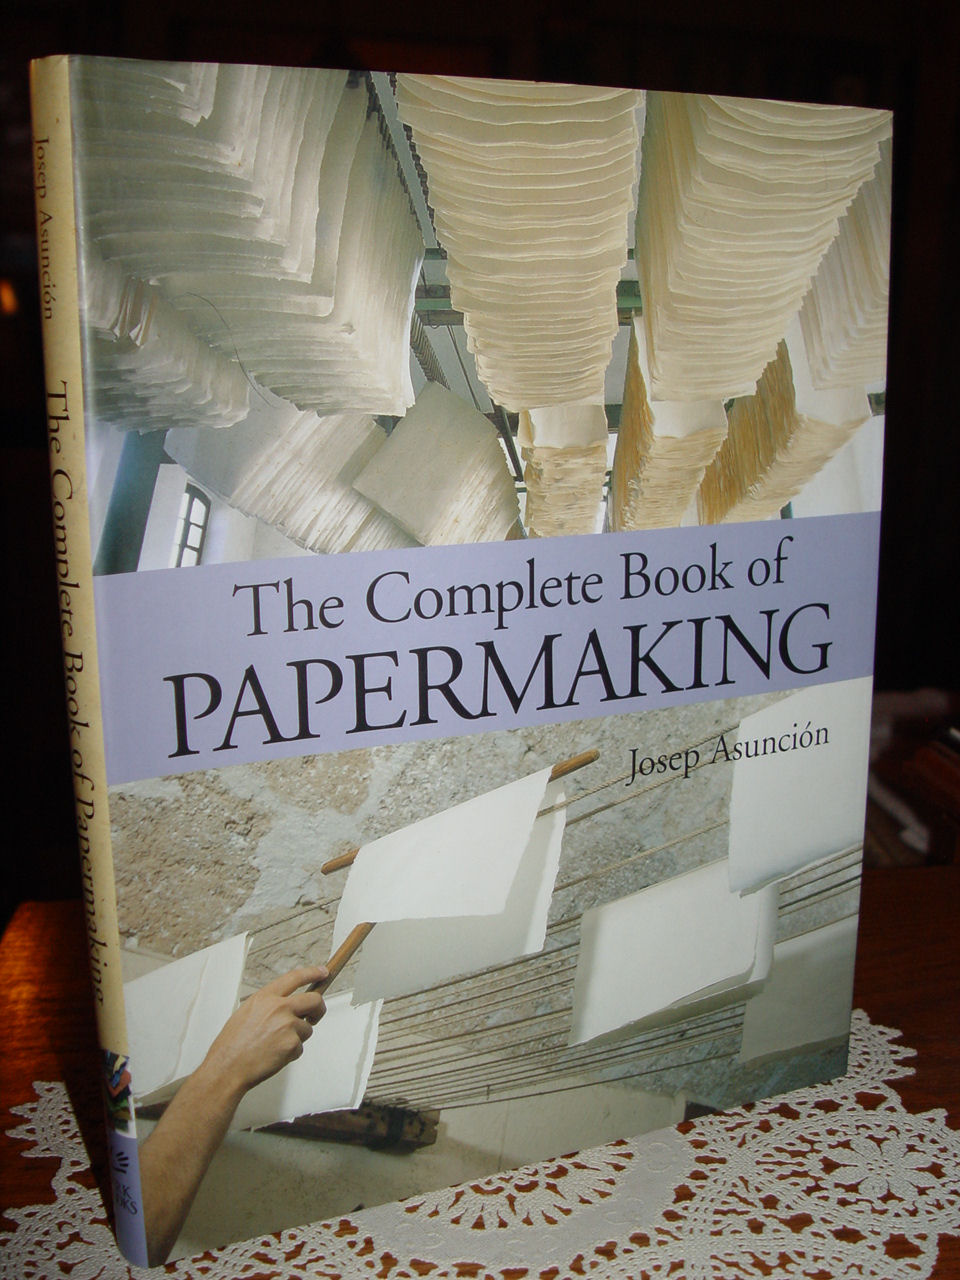 The Complete
                        Book of Papermaking 2003 by Josep Asuncion